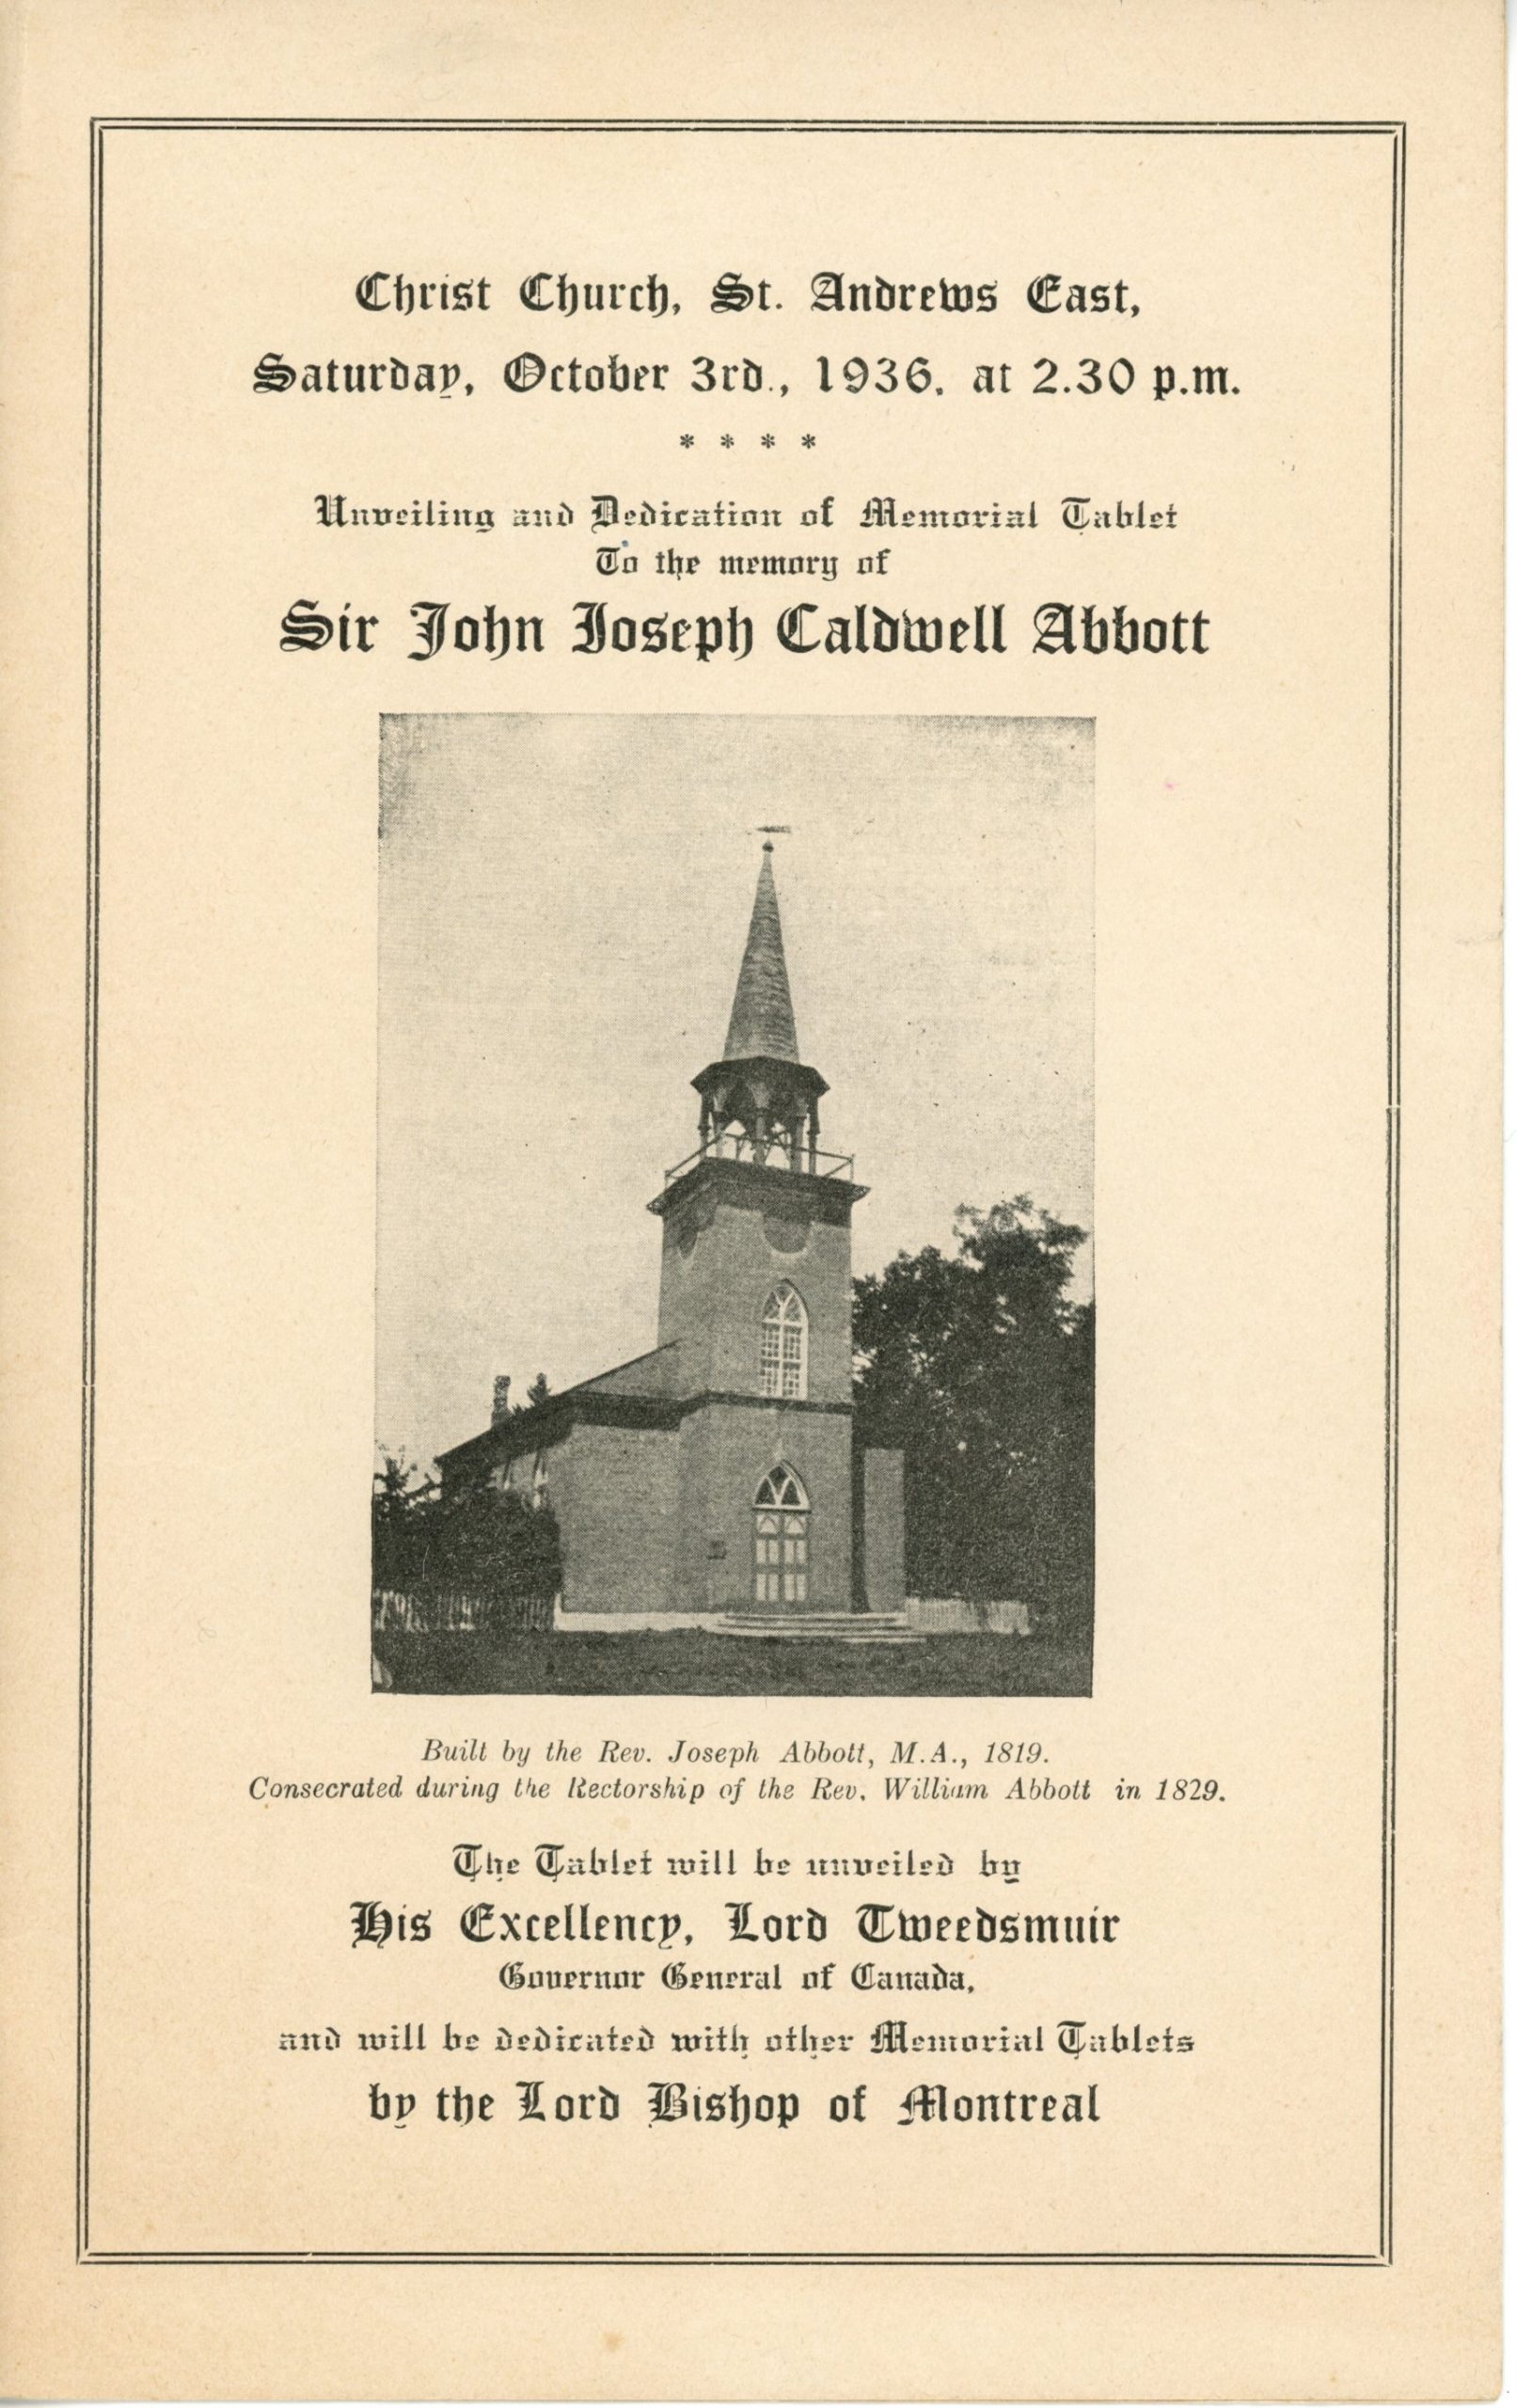 Cover of the program for the Sir John Joseph Caldwell Abbott memorial dedication ceremony at Christ Church, St. Andrews, black ink on sepia paper. The top of the page reads: “Christ Church, St. Andrews East, Saturday, October 3rd, 1936 at 2.30 pm Unveiling and Dedication of Memorial Tablet To the memory of Si John Joseph Caldwell Abbott” In the centre of the page is a photograph of Christ Church. Below this is the caption: “Built by the Rev. Joseph Abbott, M.A., 1819. Consecrated during the Rectorship of the Rev. William Abbott in 1819”. The bottom of the program reads: (Voir si texte de remplacement ou texte page galerie) “The Tablet will be unveiled by His Excellency, Lord Tweedsmuir Governor General of Canada, and will be dedicated with other Memorial Tablets by the Lord Bishop of Montreal”. The text is enclosed within a thin double border.